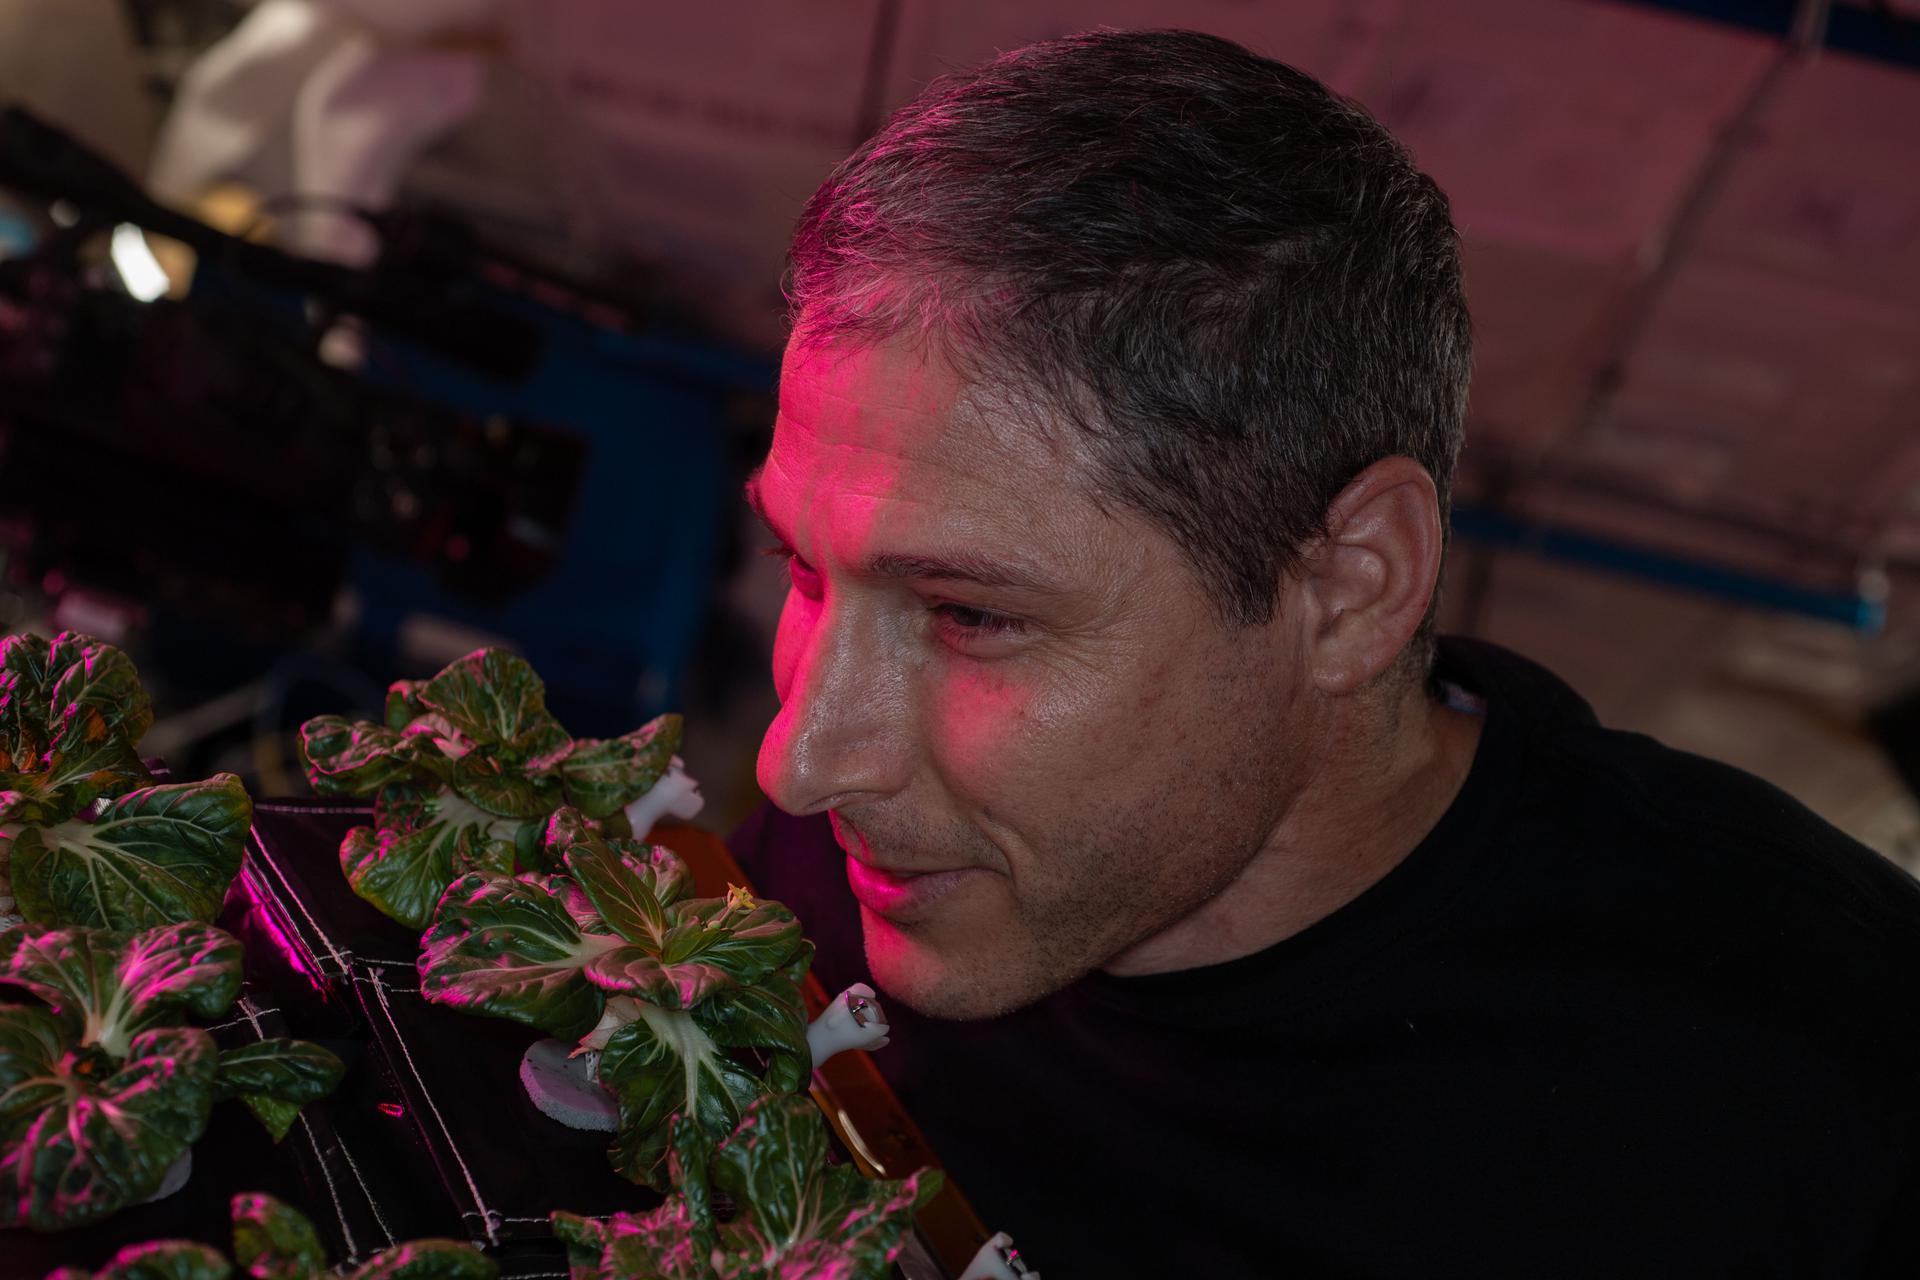 image of an astronaut smelling plants grown on the space station